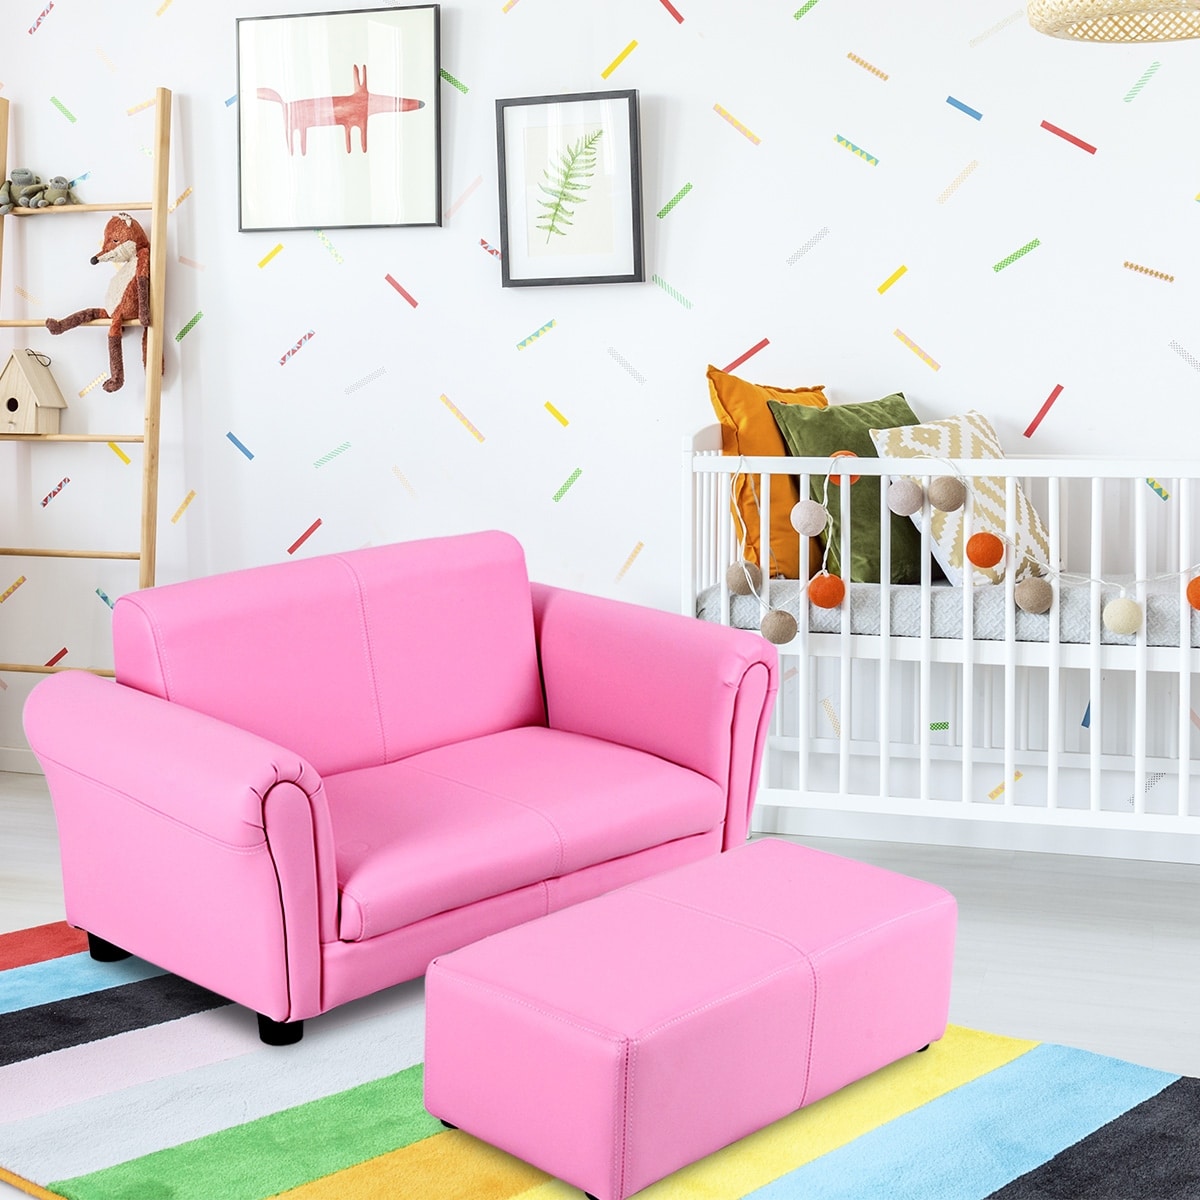 Blue Okeline Children Kids Mini Sofa Set Armchair Chair Seat with Free Footstool PU Leather Bright Pink 